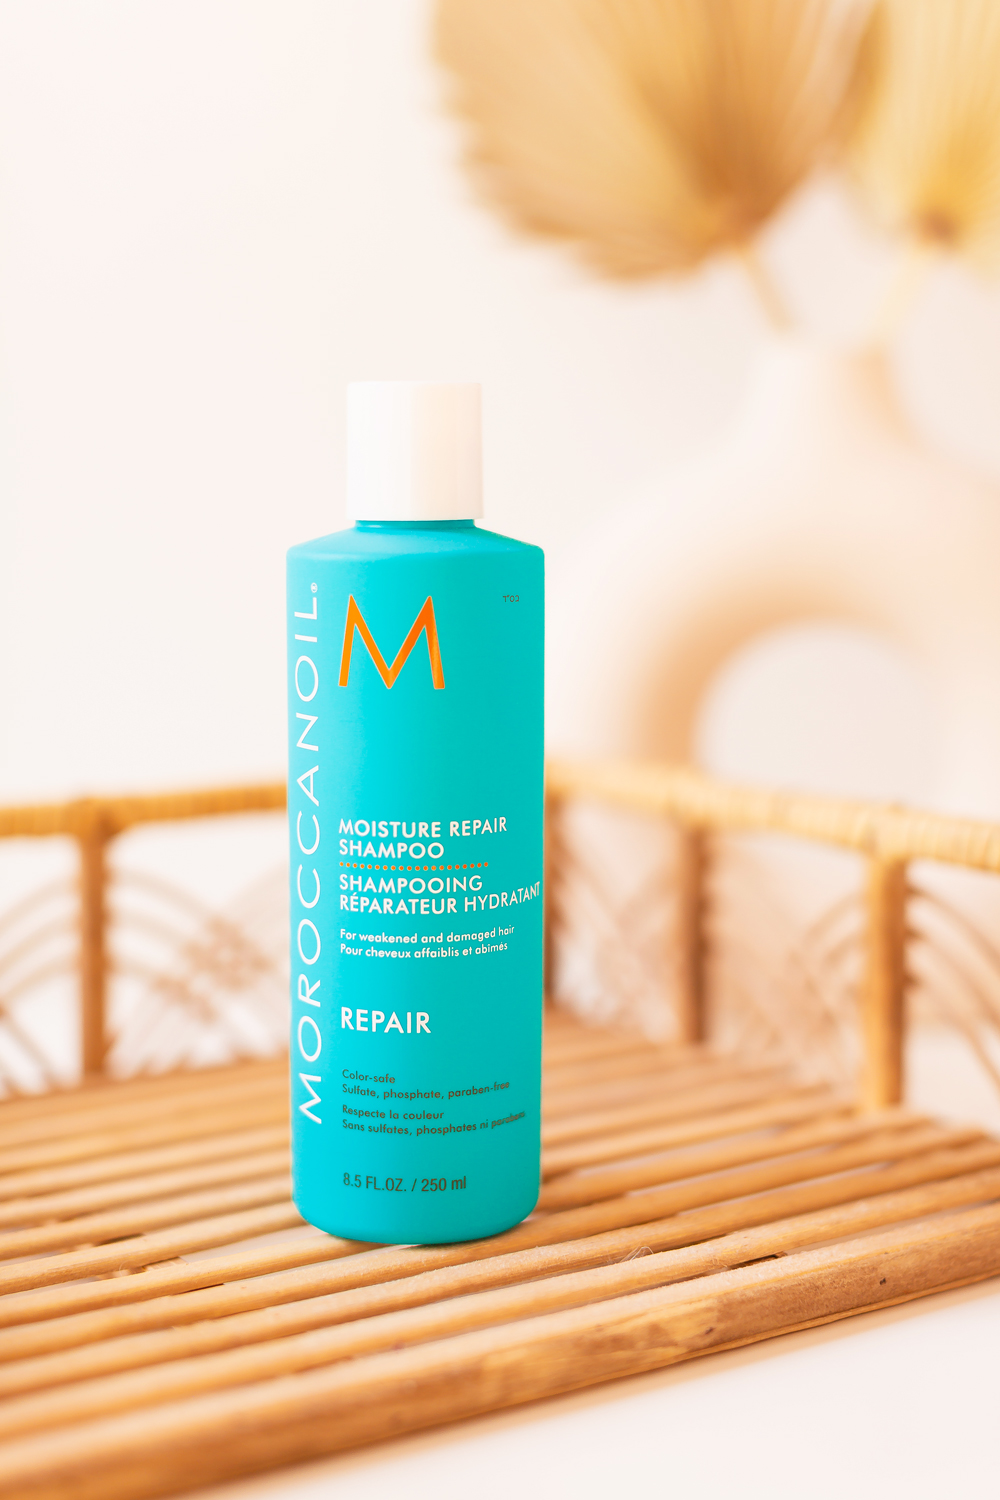 Moroccanoil Moisture Repair Shampoo Photos, Review | Teal blue bottle of shampoo on a boho rattan tray|  JustineCelina’s Haircare Routine for Long, Thick, Colour Treated Hair | Color-safe, sulphate free, phosphate free and paraben free haircare routine | MoroccanOil haircare routine | BeautySense review | Gentle Haircare Routine | JustineCelina’s favourite shampoo | JustineCelina Hair | Hair growth tips | Hair growth products | Long Hair Secrets | Calgary Beauty Blogger // JustineCelina.com